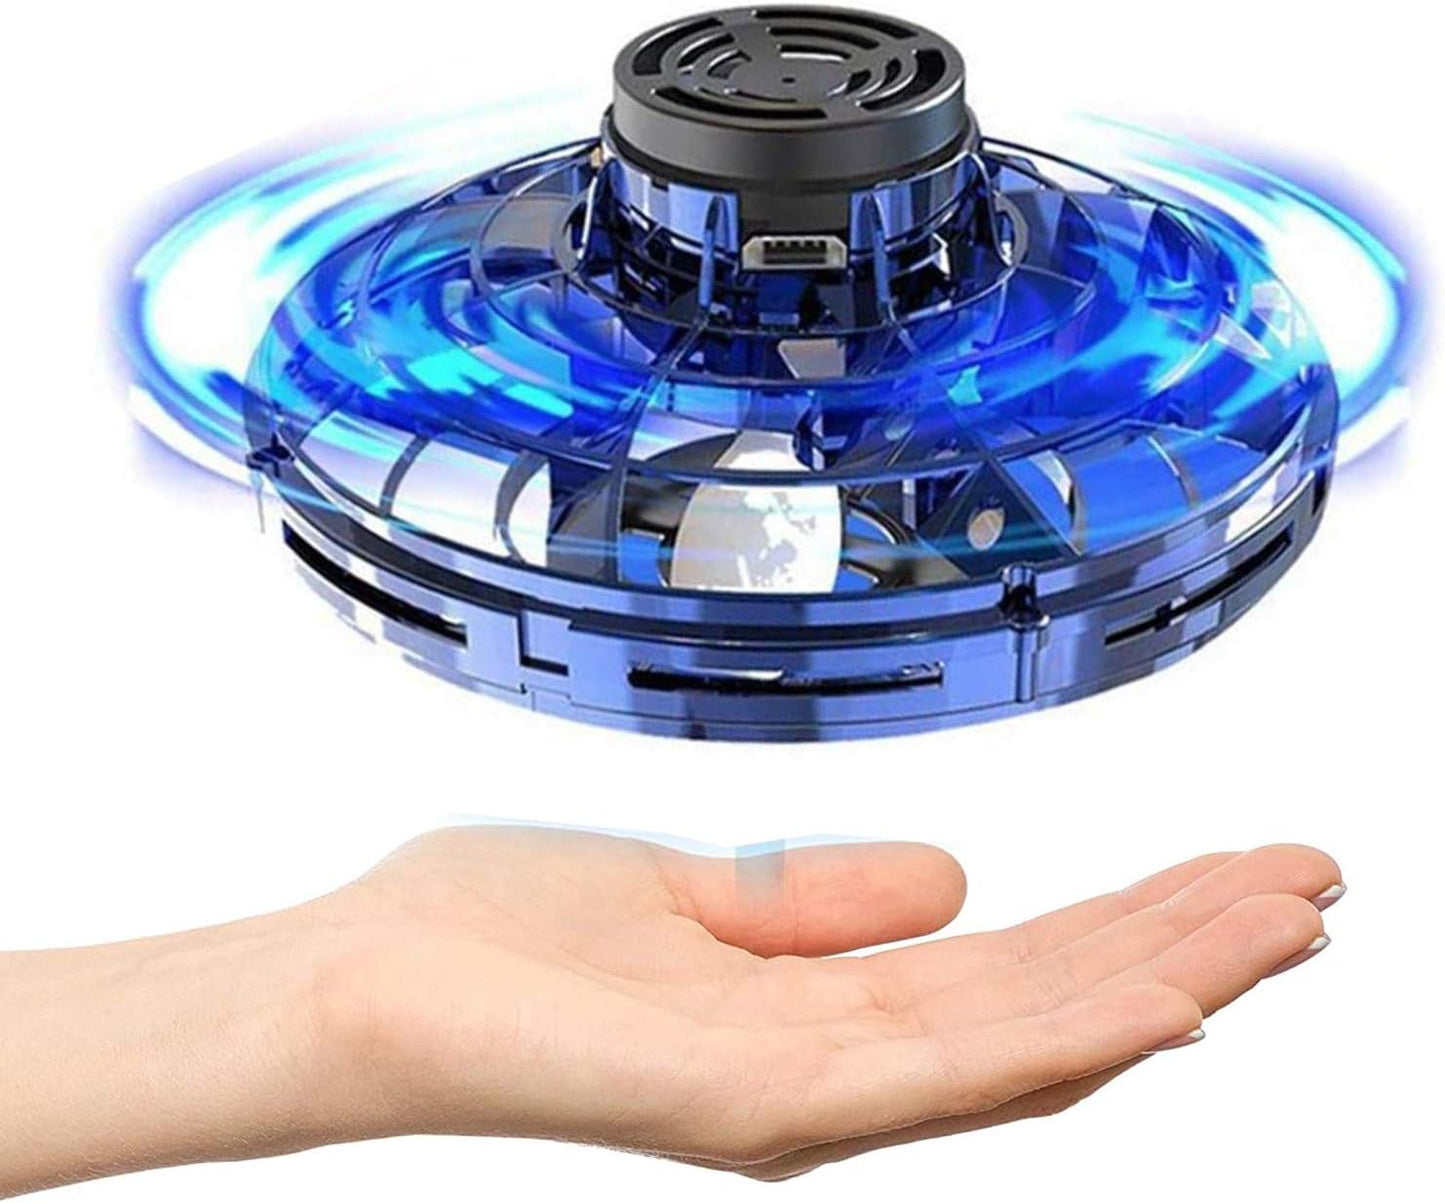 "LED Flying Spinner Drone for Kids: Hand-Operated Mini UFO Toy for Indoor & Outdoor Fun (Random Color)"